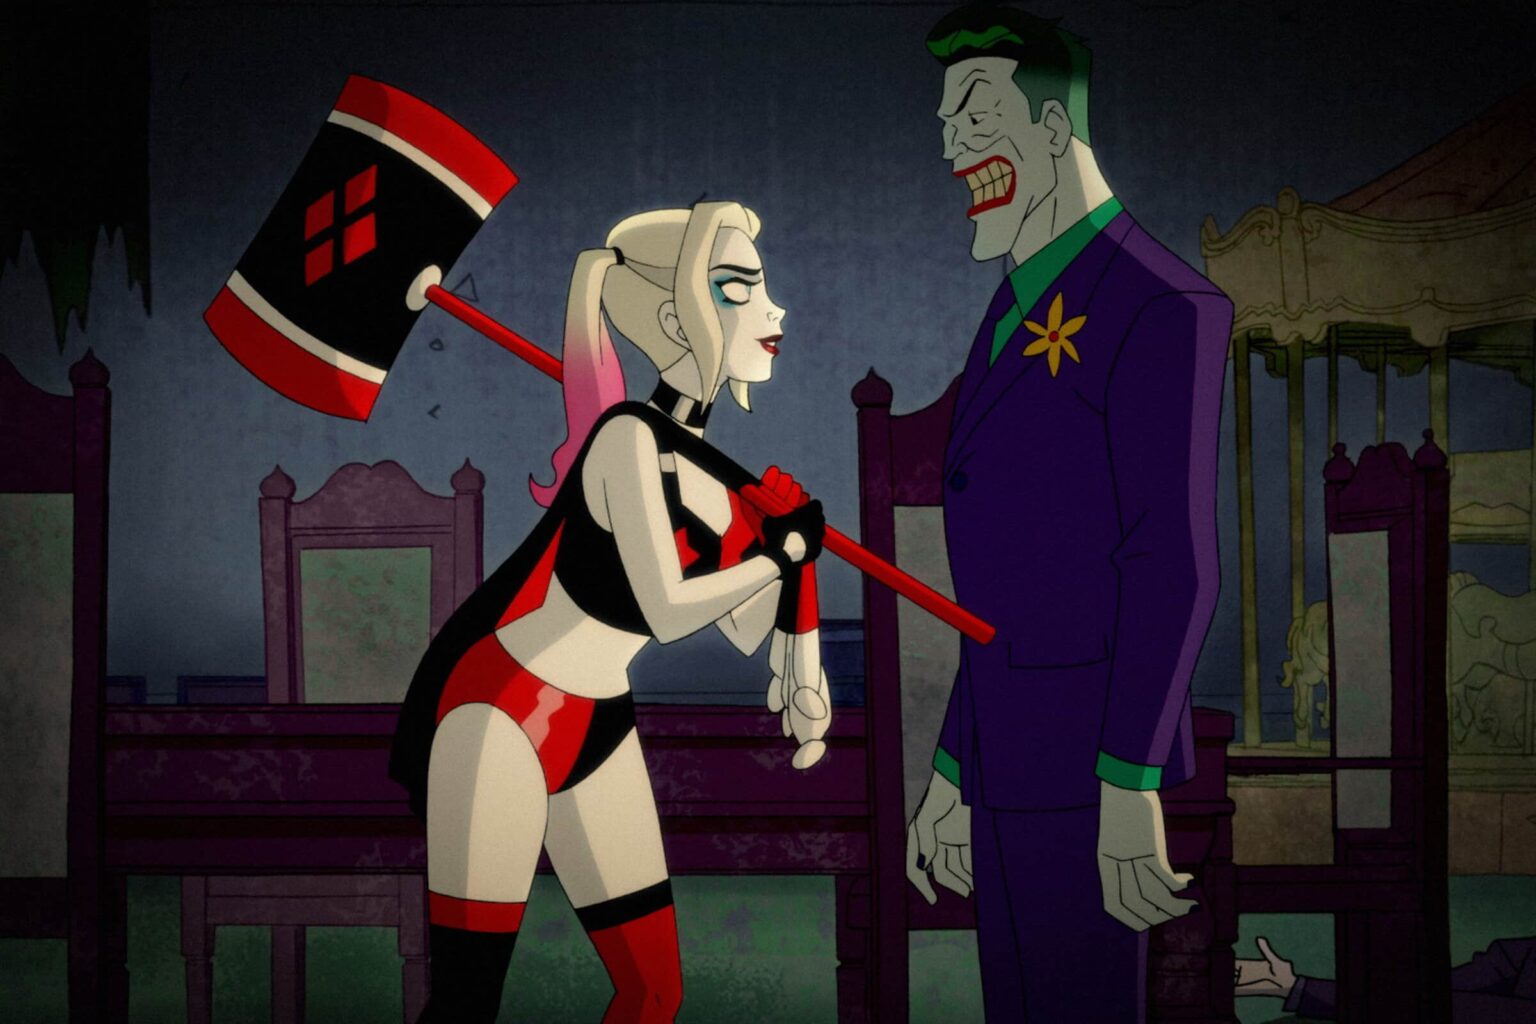 2016’s Suicide Squad was a mess of a film with one redeeming feature: Harley Quinn. But will we ever see her again? Find out the latest details!